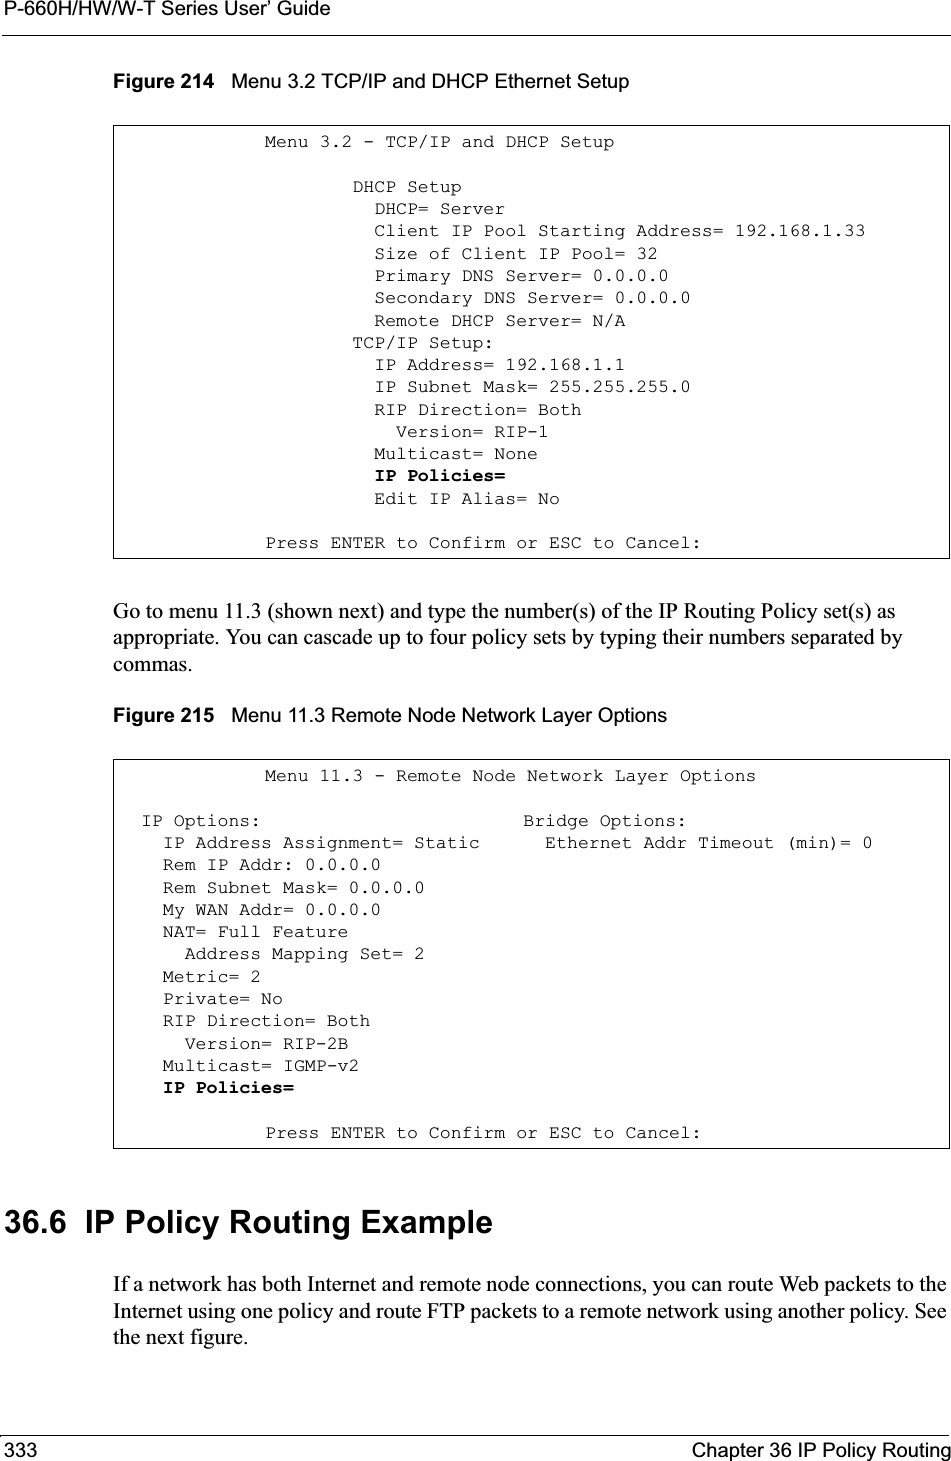 P-660H/HW/W-T Series User’ Guide333 Chapter 36 IP Policy RoutingFigure 214   Menu 3.2 TCP/IP and DHCP Ethernet SetupGo to menu 11.3 (shown next) and type the number(s) of the IP Routing Policy set(s) as appropriate. You can cascade up to four policy sets by typing their numbers separated by commas.Figure 215   Menu 11.3 Remote Node Network Layer Options36.6  IP Policy Routing ExampleIf a network has both Internet and remote node connections, you can route Web packets to the Internet using one policy and route FTP packets to a remote network using another policy. See the next figure. Menu 3.2 - TCP/IP and DHCP Setup        DHCP Setup          DHCP= Server          Client IP Pool Starting Address= 192.168.1.33          Size of Client IP Pool= 32          Primary DNS Server= 0.0.0.0          Secondary DNS Server= 0.0.0.0          Remote DHCP Server= N/A        TCP/IP Setup:          IP Address= 192.168.1.1          IP Subnet Mask= 255.255.255.0          RIP Direction= Both            Version= RIP-1          Multicast= None          IP Policies=          Edit IP Alias= NoPress ENTER to Confirm or ESC to Cancel:Menu 11.3 - Remote Node Network Layer Options  IP Options:                        Bridge Options:    IP Address Assignment= Static      Ethernet Addr Timeout (min)= 0    Rem IP Addr: 0.0.0.0                  Rem Subnet Mask= 0.0.0.0      My WAN Addr= 0.0.0.0                 NAT= Full Feature      Address Mapping Set= 2    Metric= 2    Private= No    RIP Direction= Both                   Version= RIP-2B                     Multicast= IGMP-v2    IP Policies= Press ENTER to Confirm or ESC to Cancel: